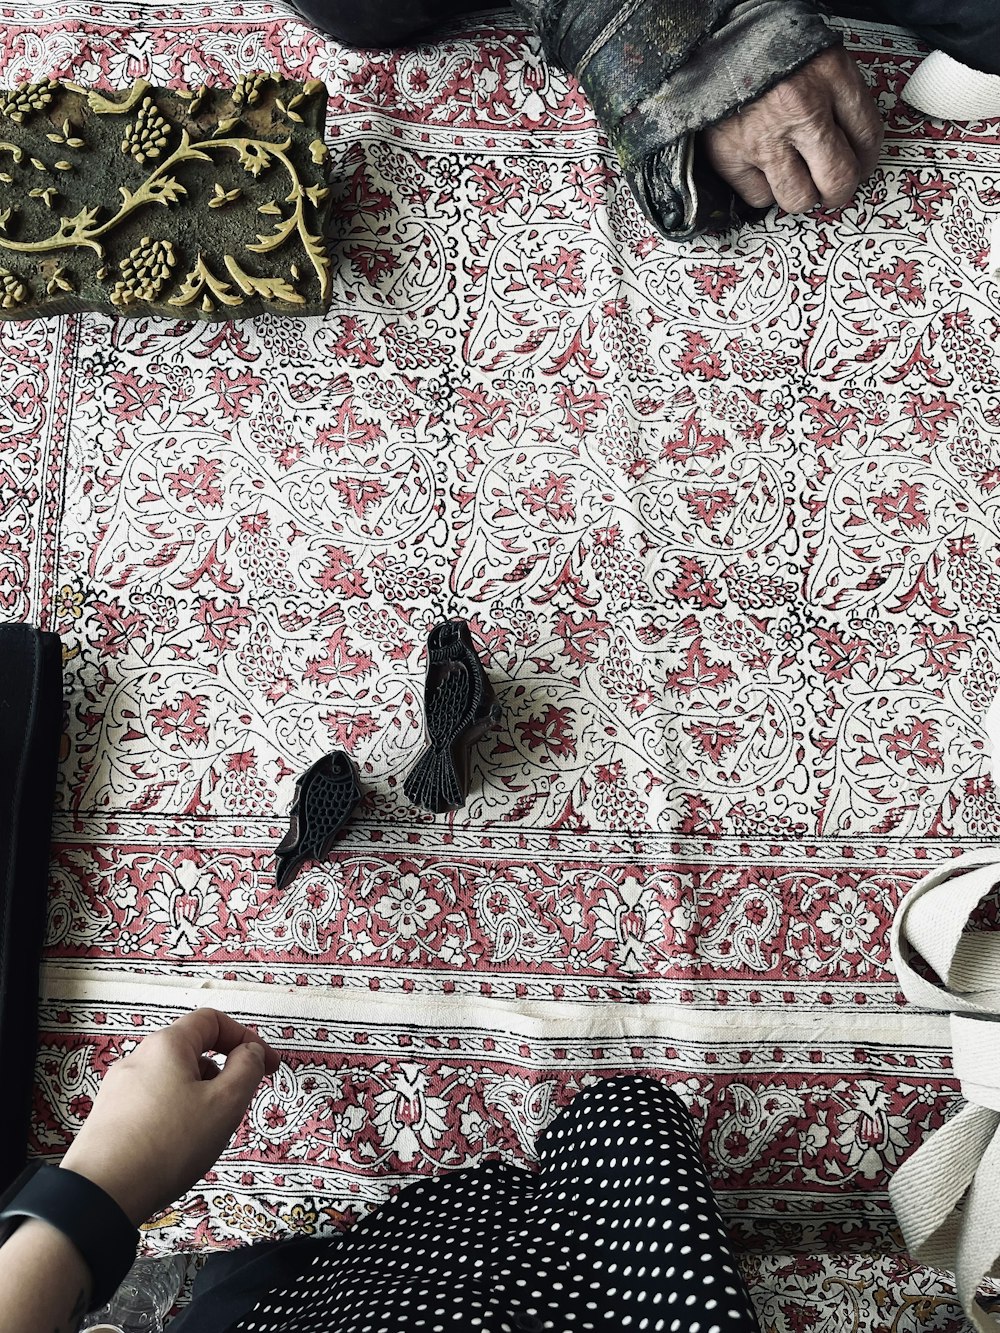 a person sitting on a rug with a pair of shoes on the floor